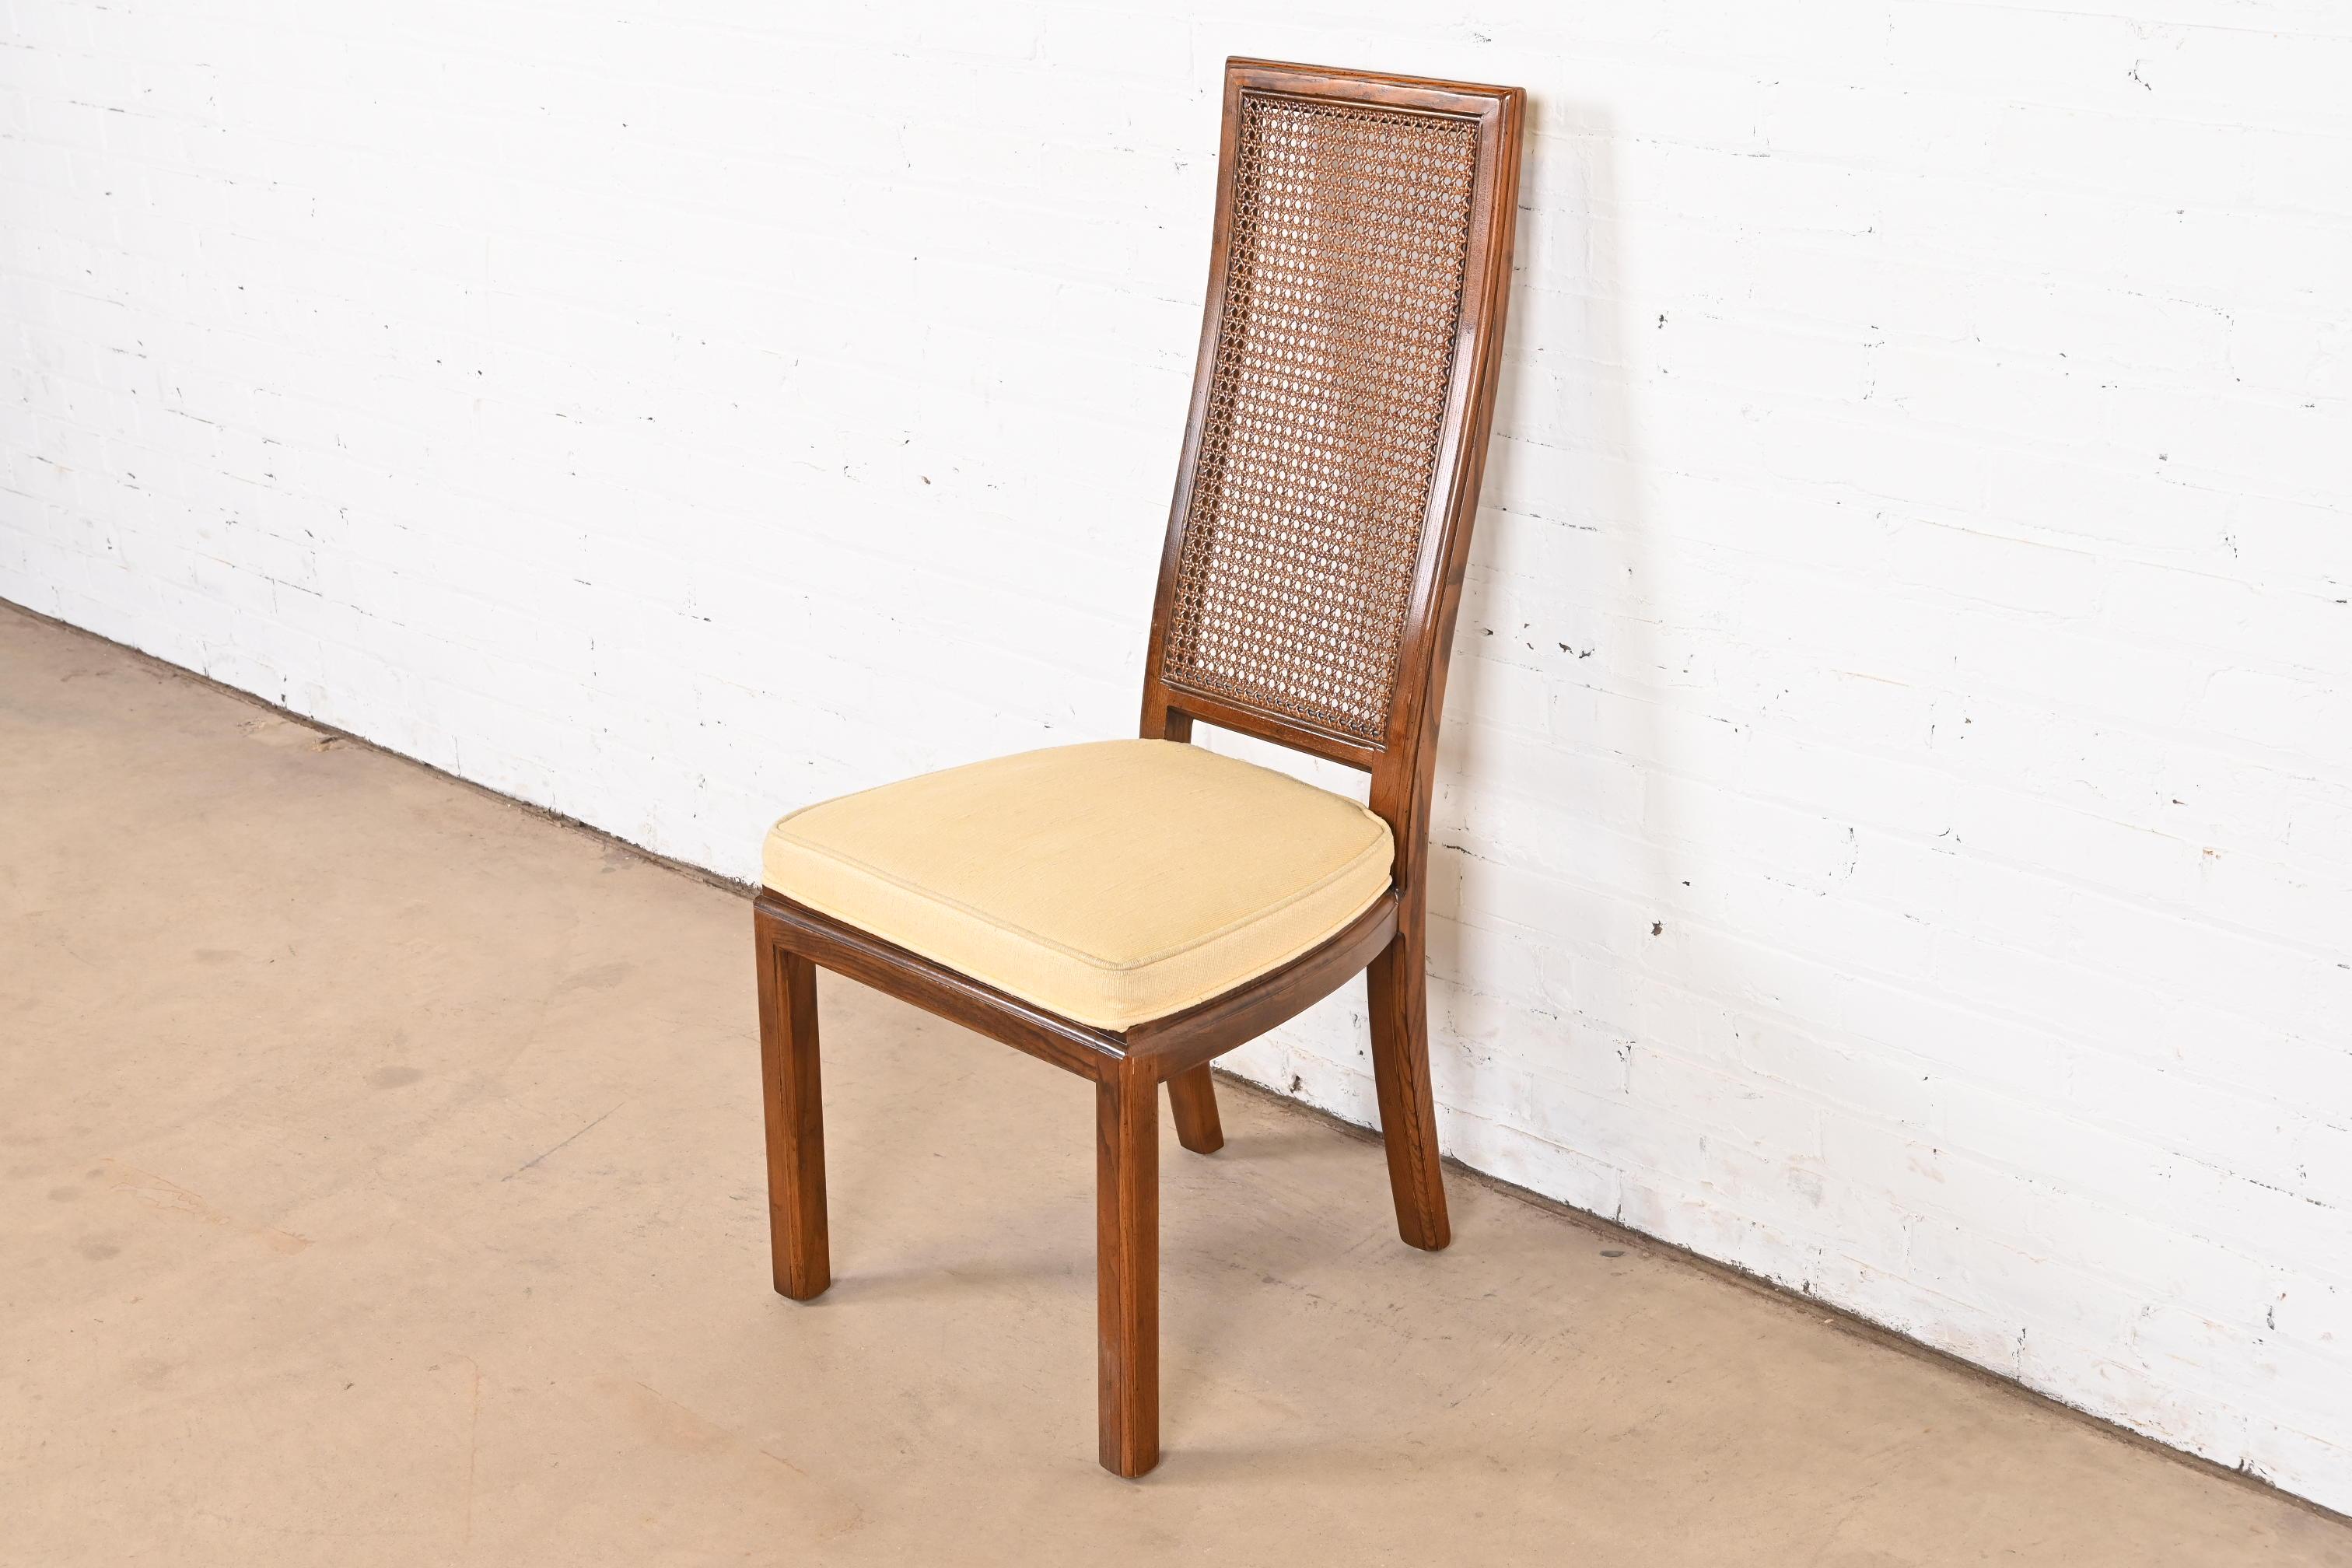 Henredon Mid-Century Modern Oak and Cane High Back Side Chair, Circa 1970s In Good Condition For Sale In South Bend, IN